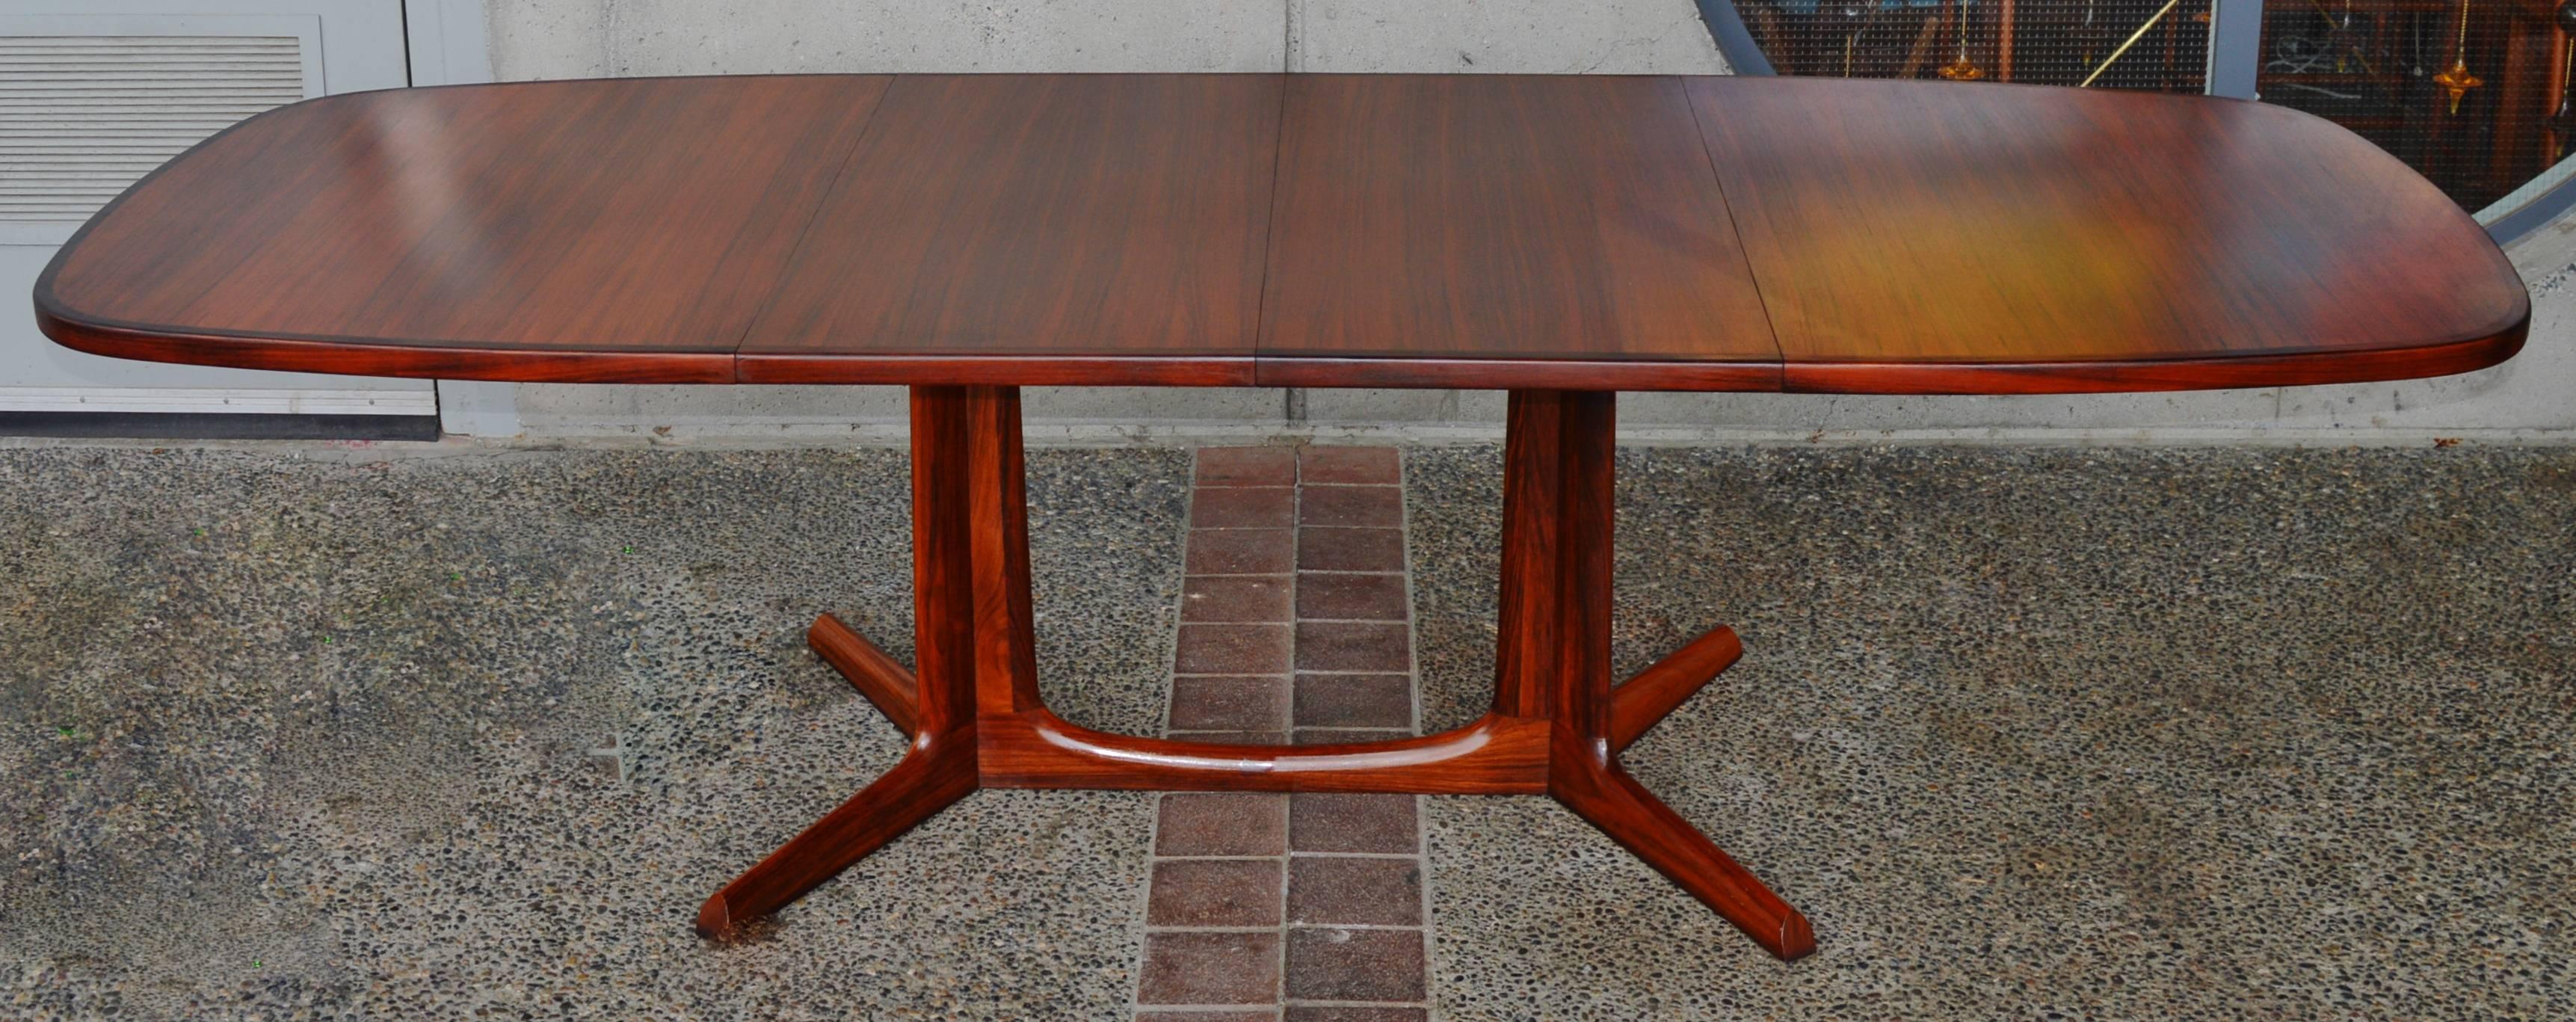 Mid-20th Century Impeccable Rosewood Moller Dining Table and Six Koefoeds Eva Chairs, Danish